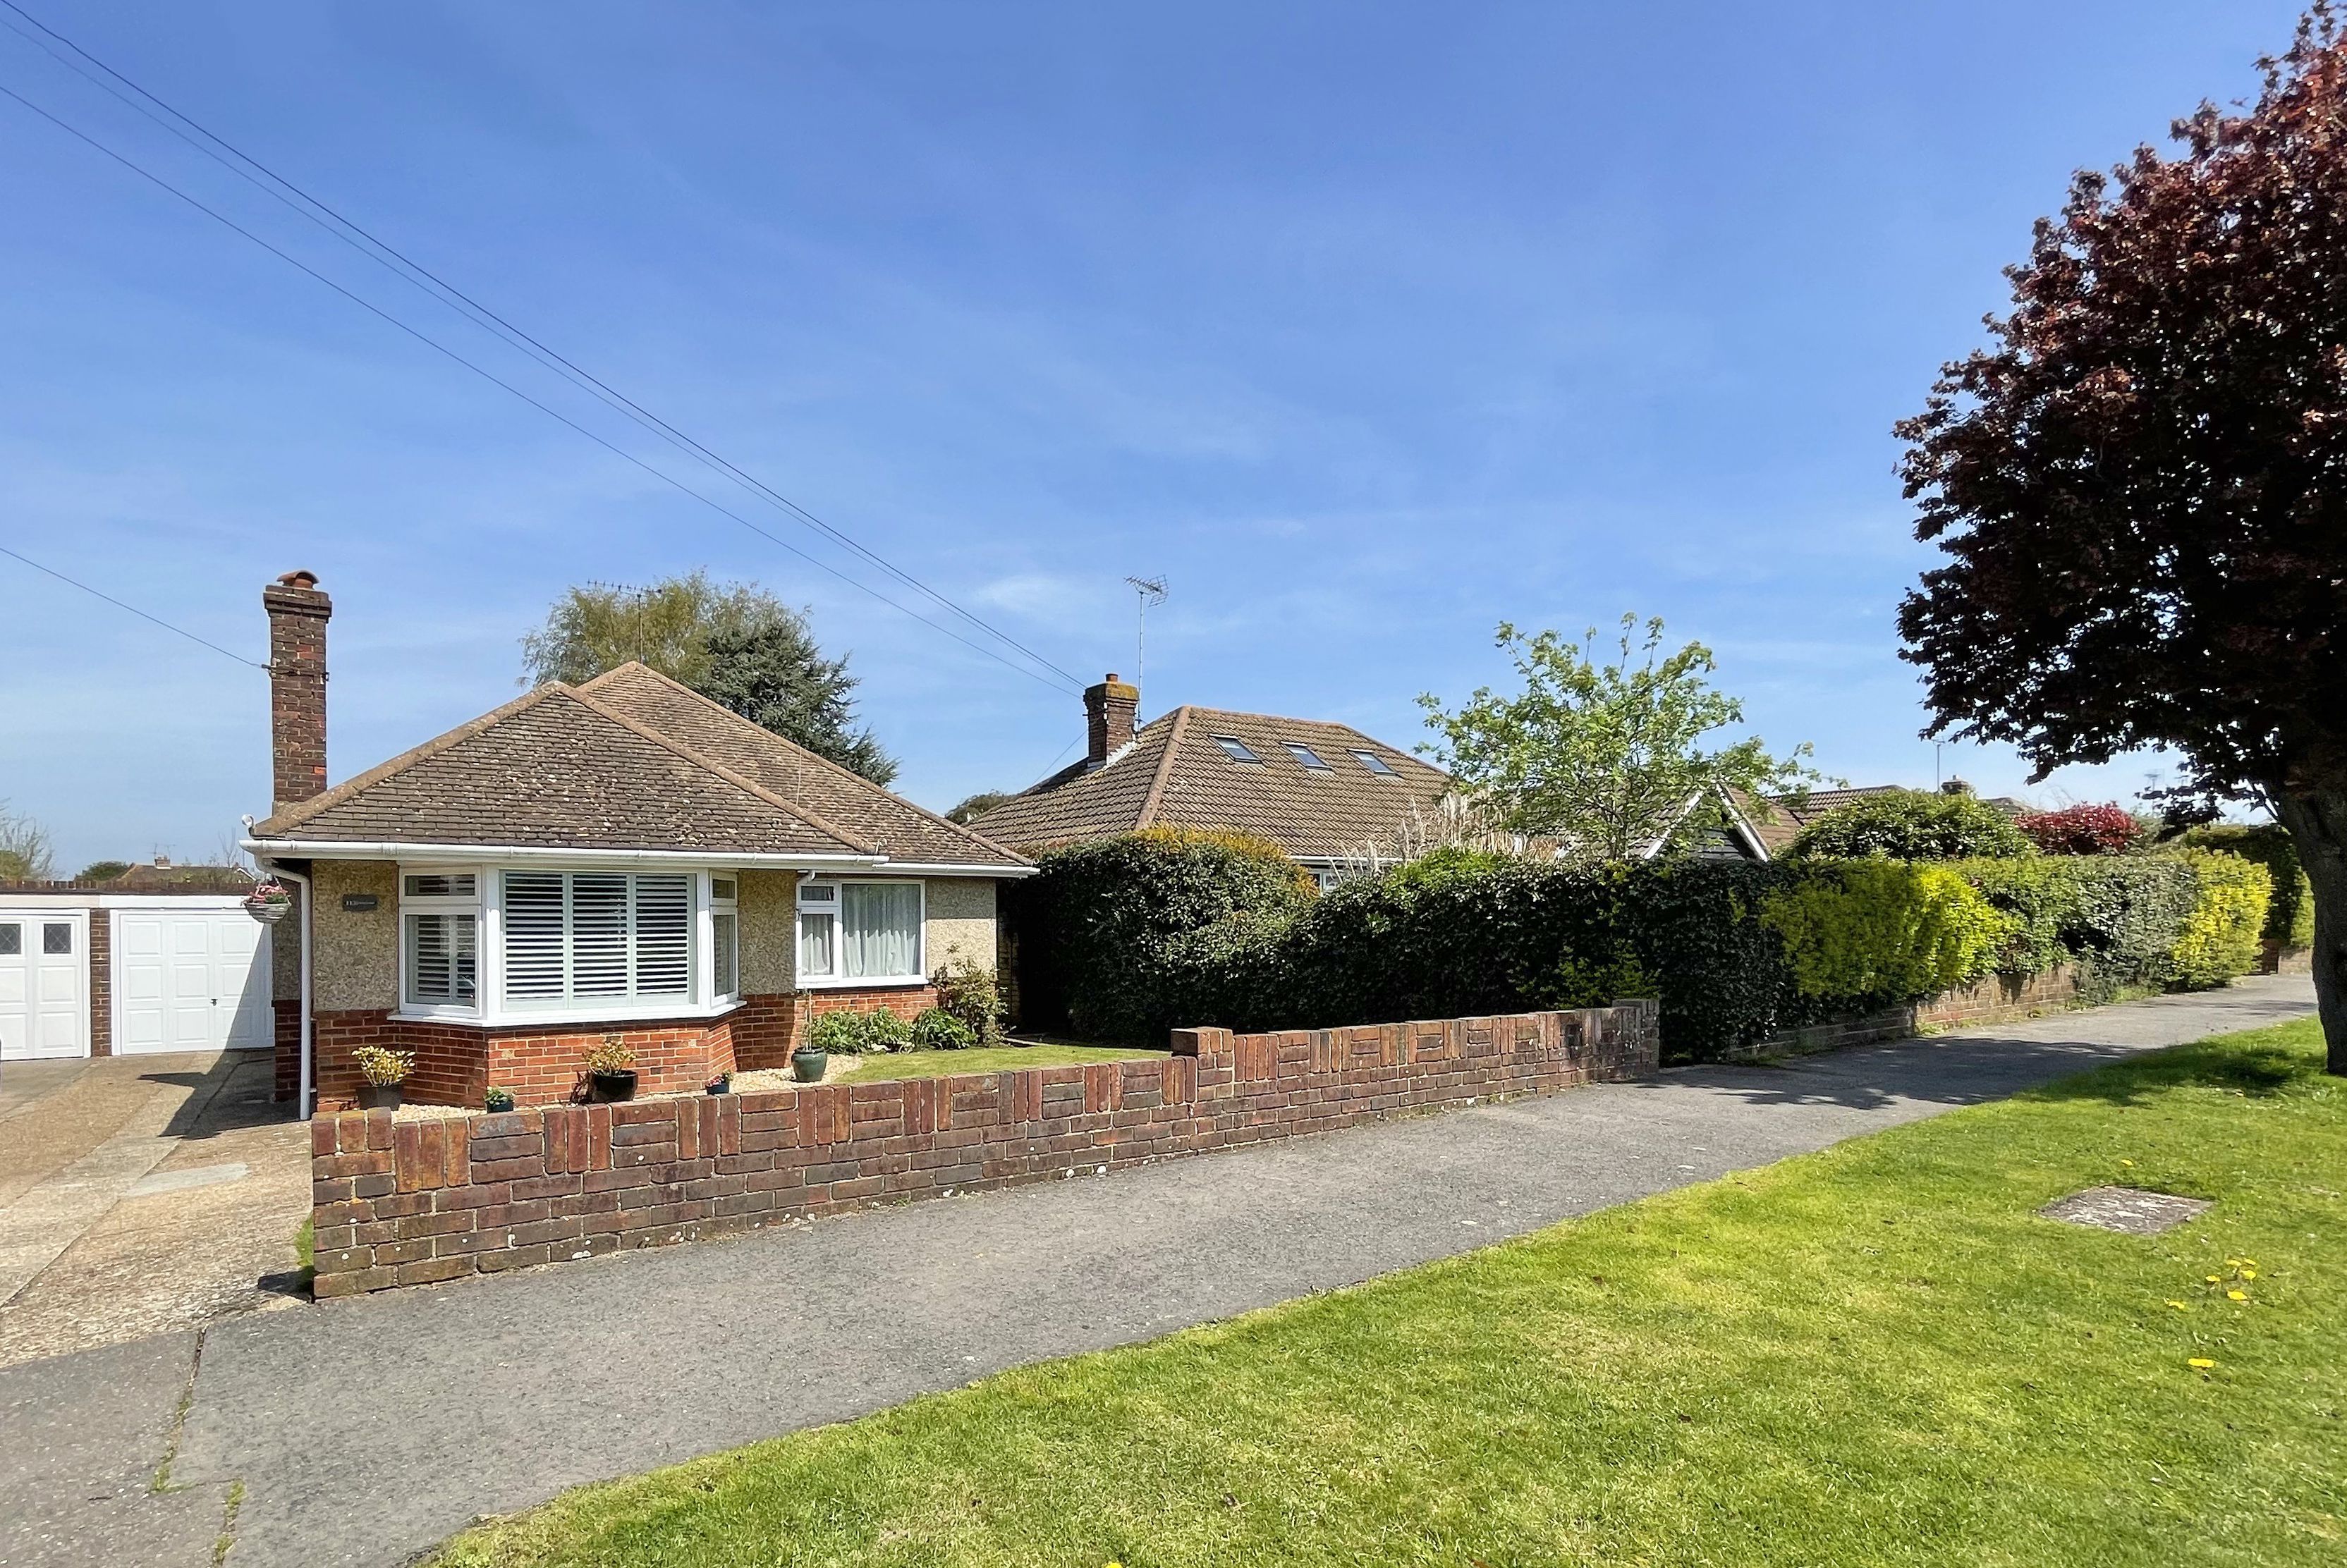 Grand Avenue, Hassocks, West Sussex, BN6 8DH